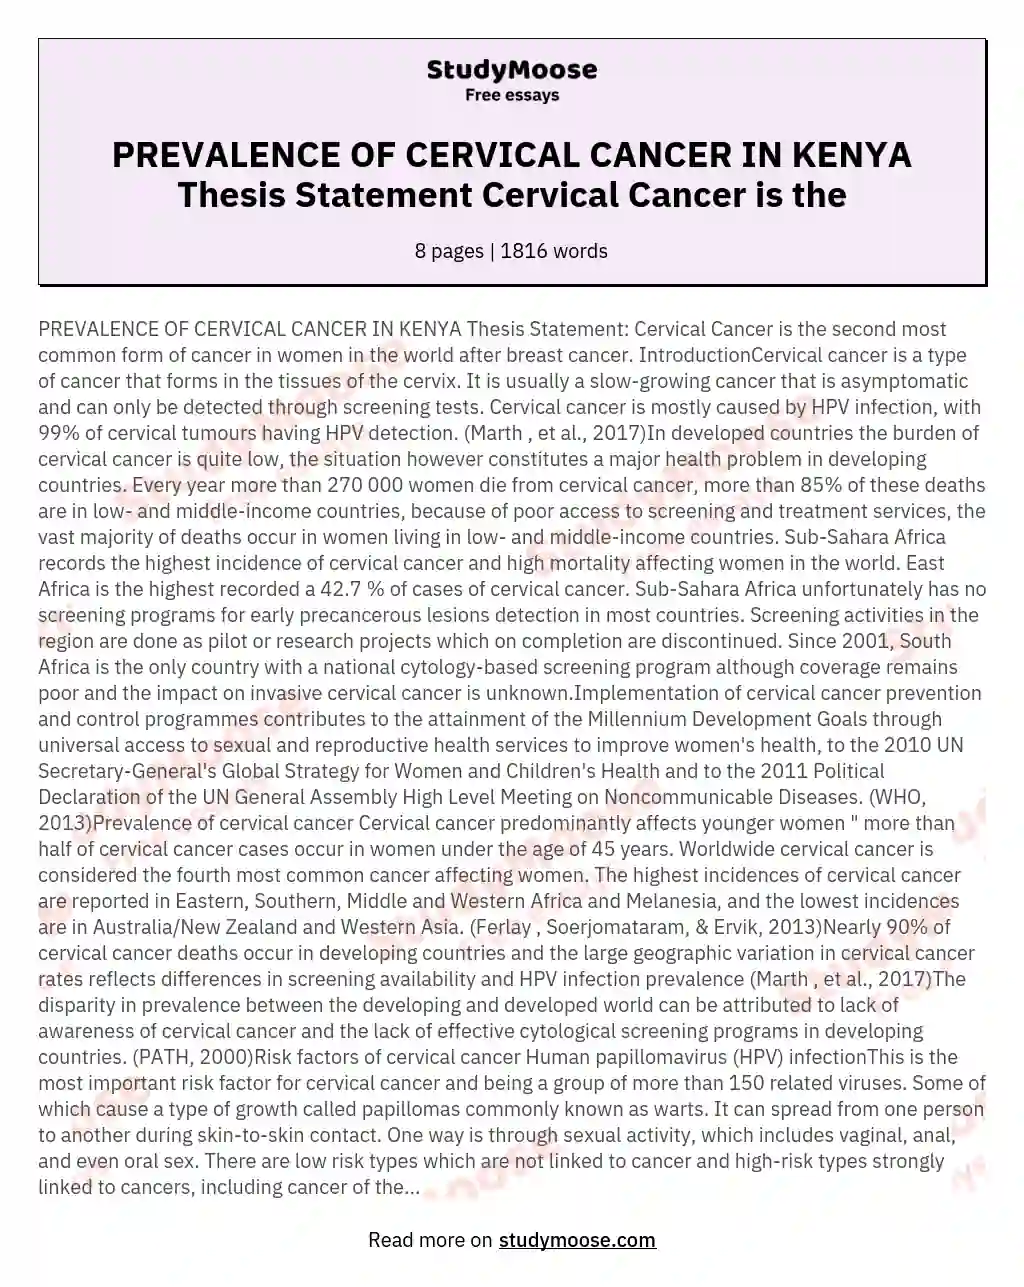 PREVALENCE OF CERVICAL CANCER IN KENYA Thesis Statement Cervical Cancer is the